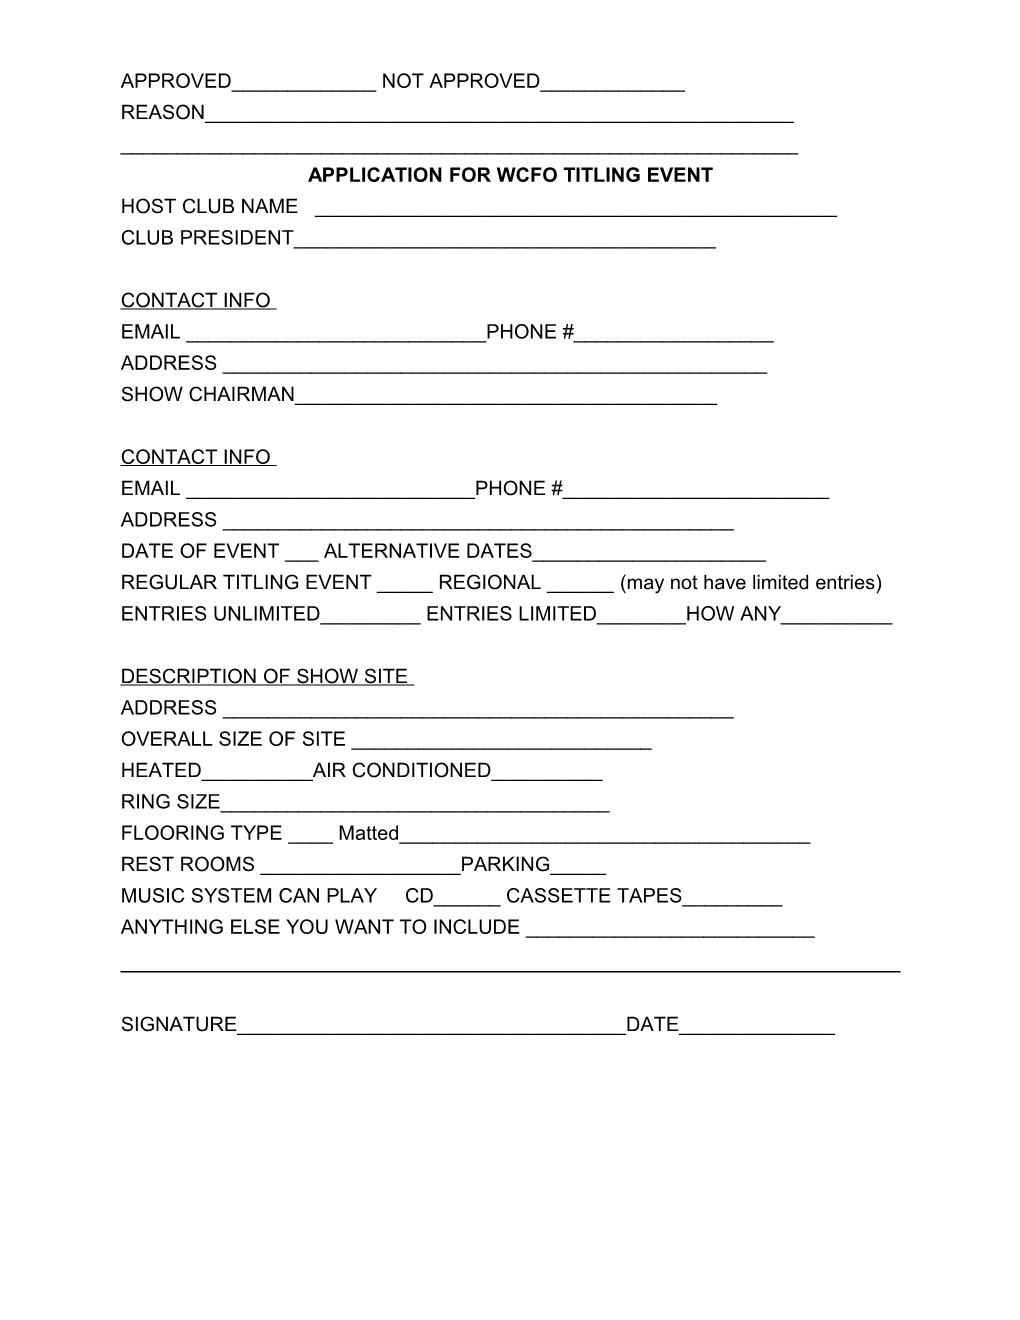 Application for Wcfo Titling Event